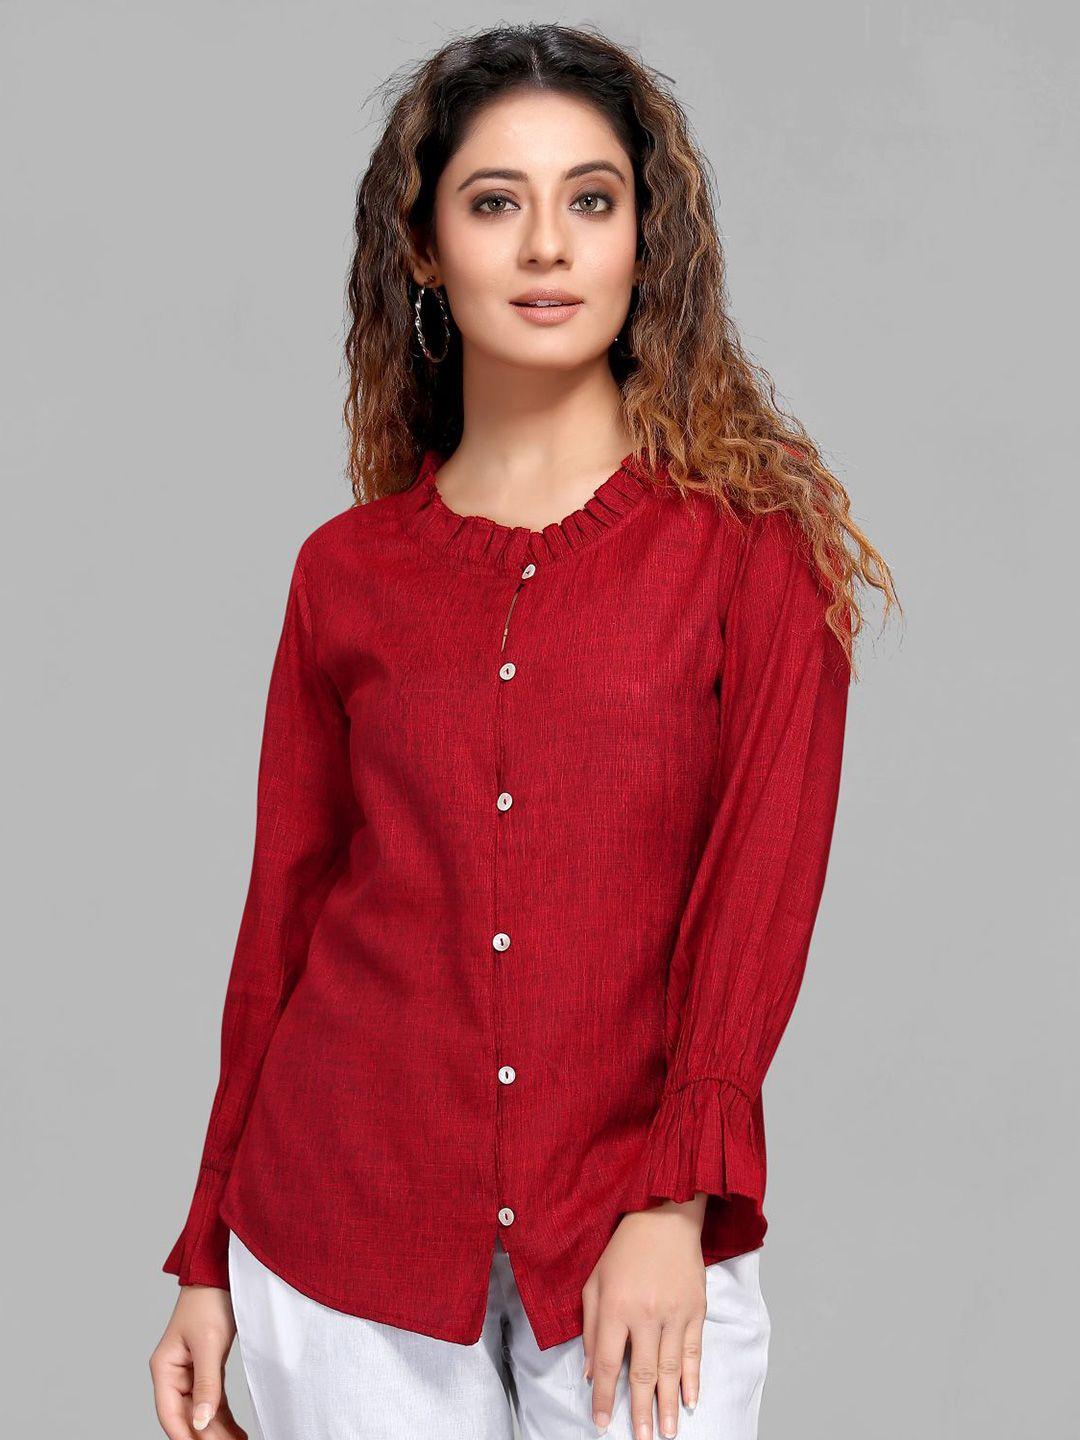 maiyee-red-shirt-style-top